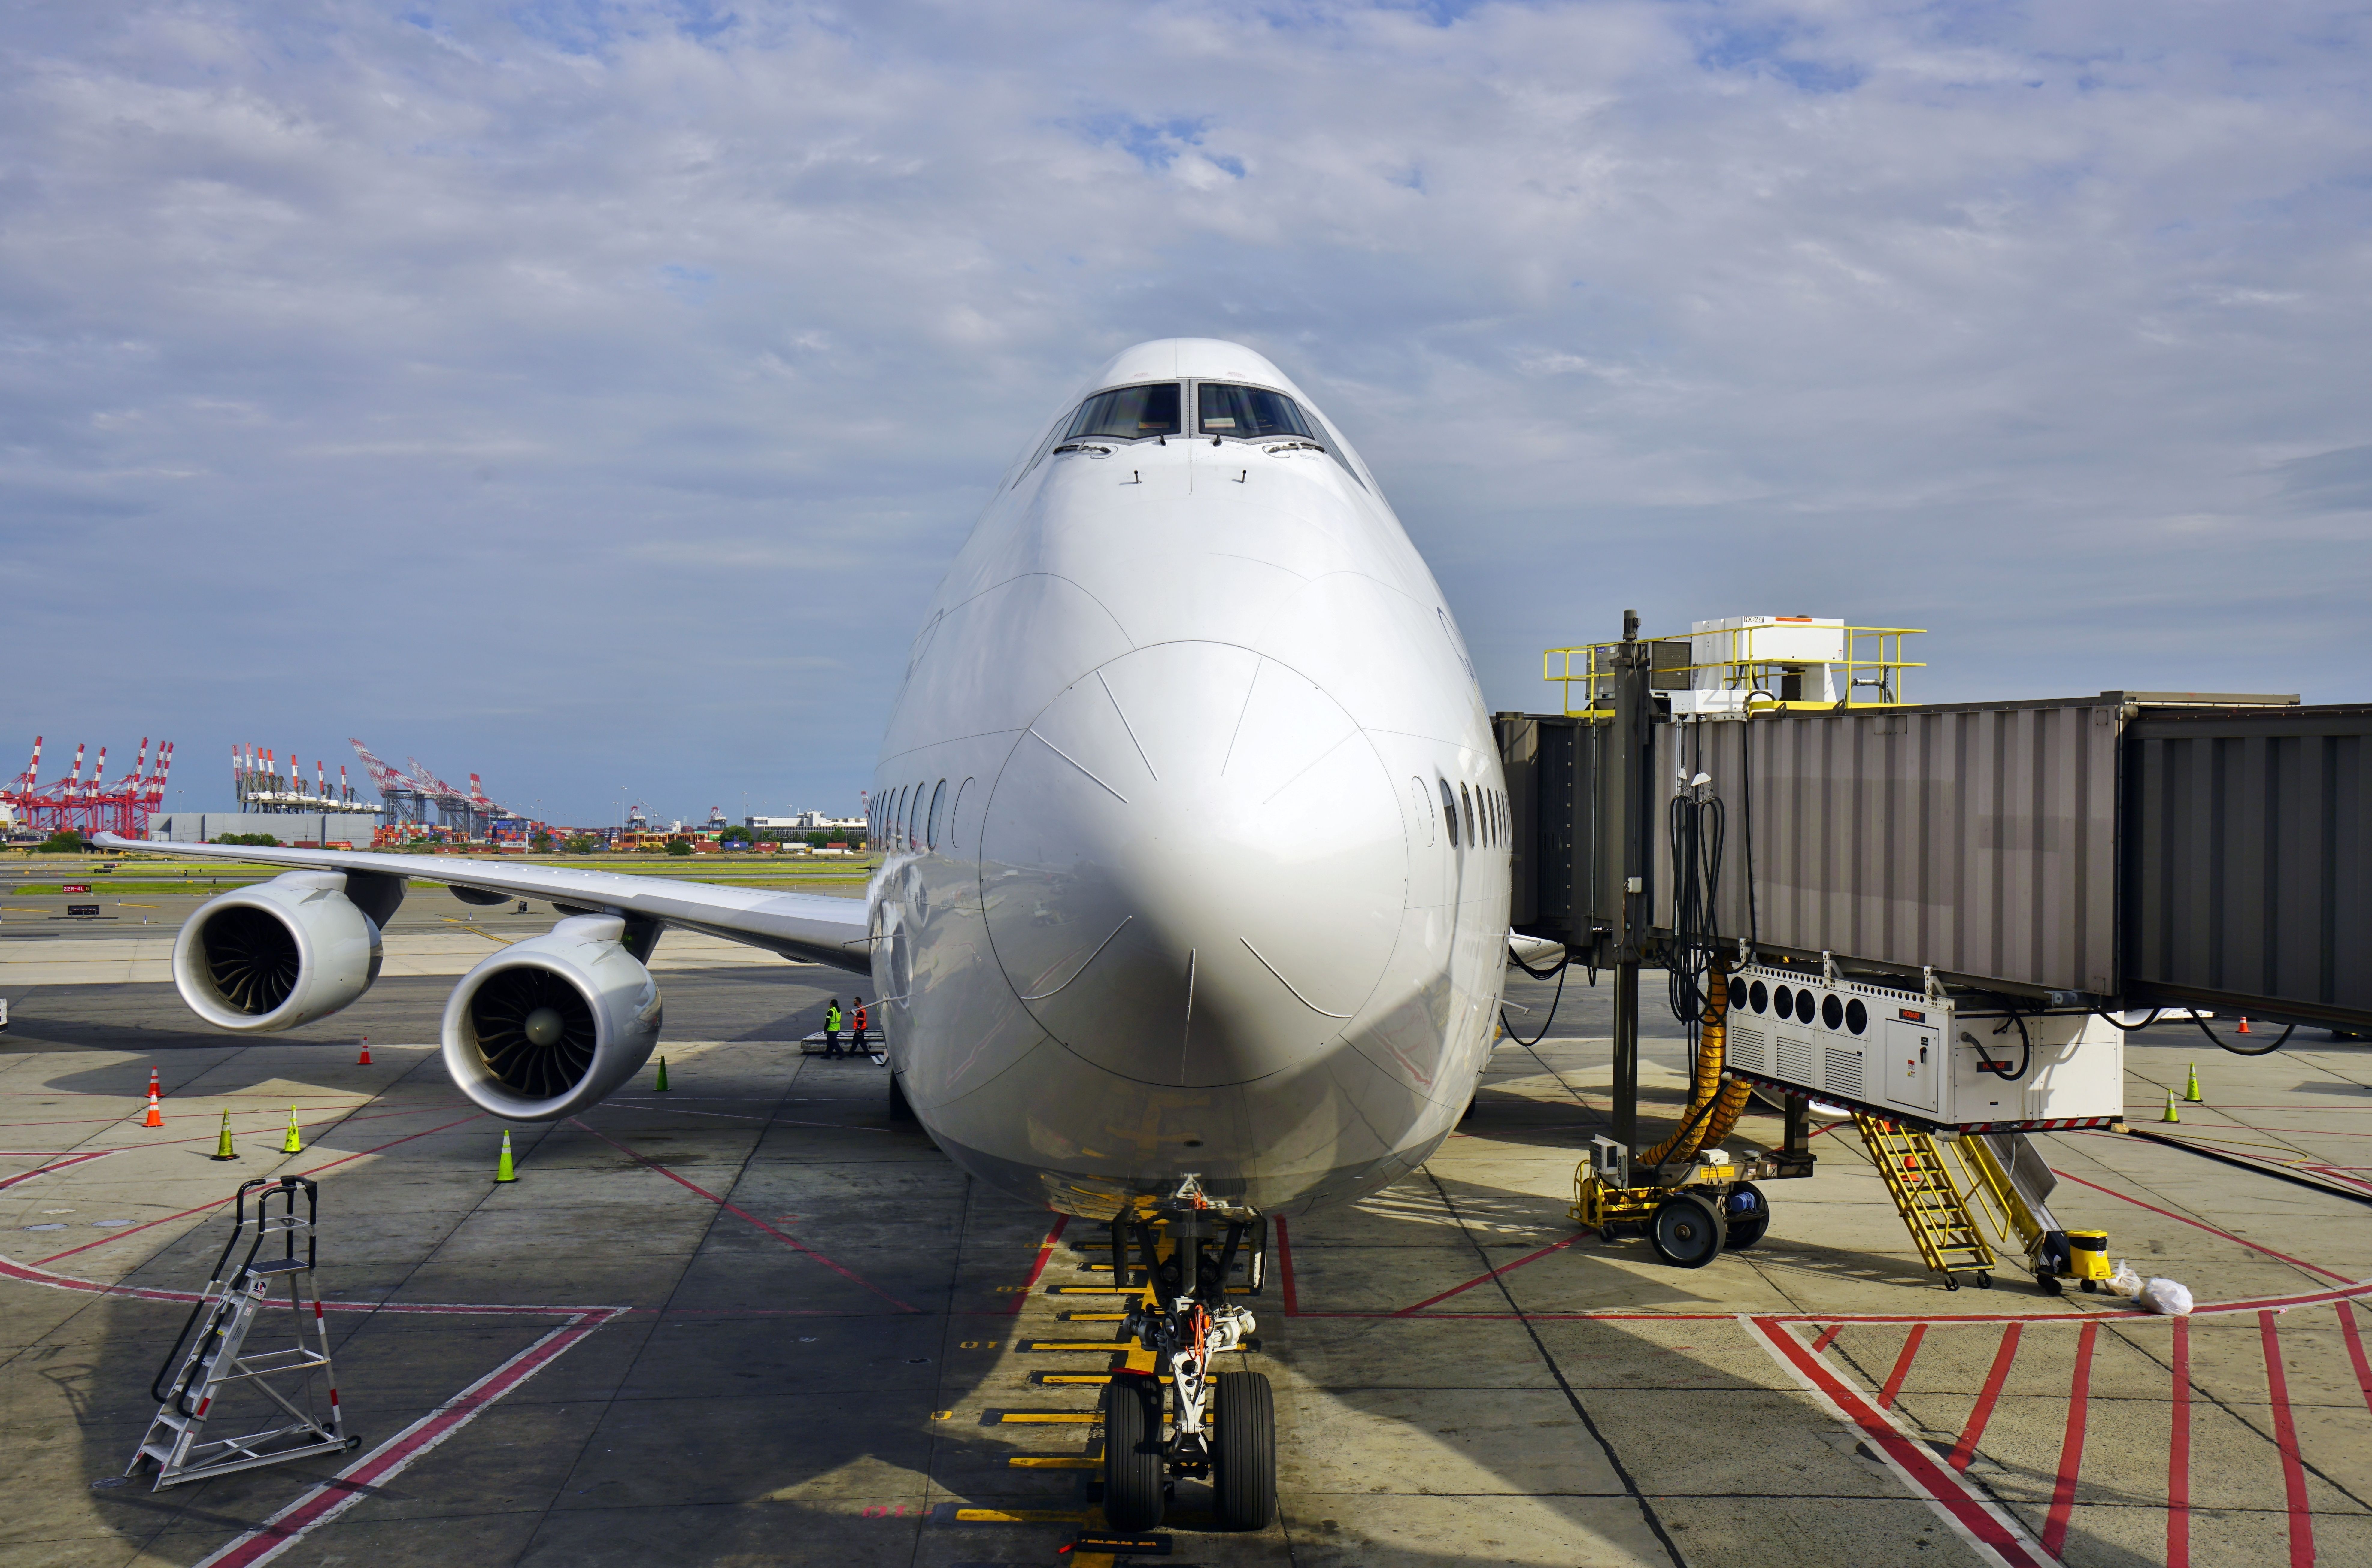 Why Boeing 747s Don't Board On The Upper Deck?